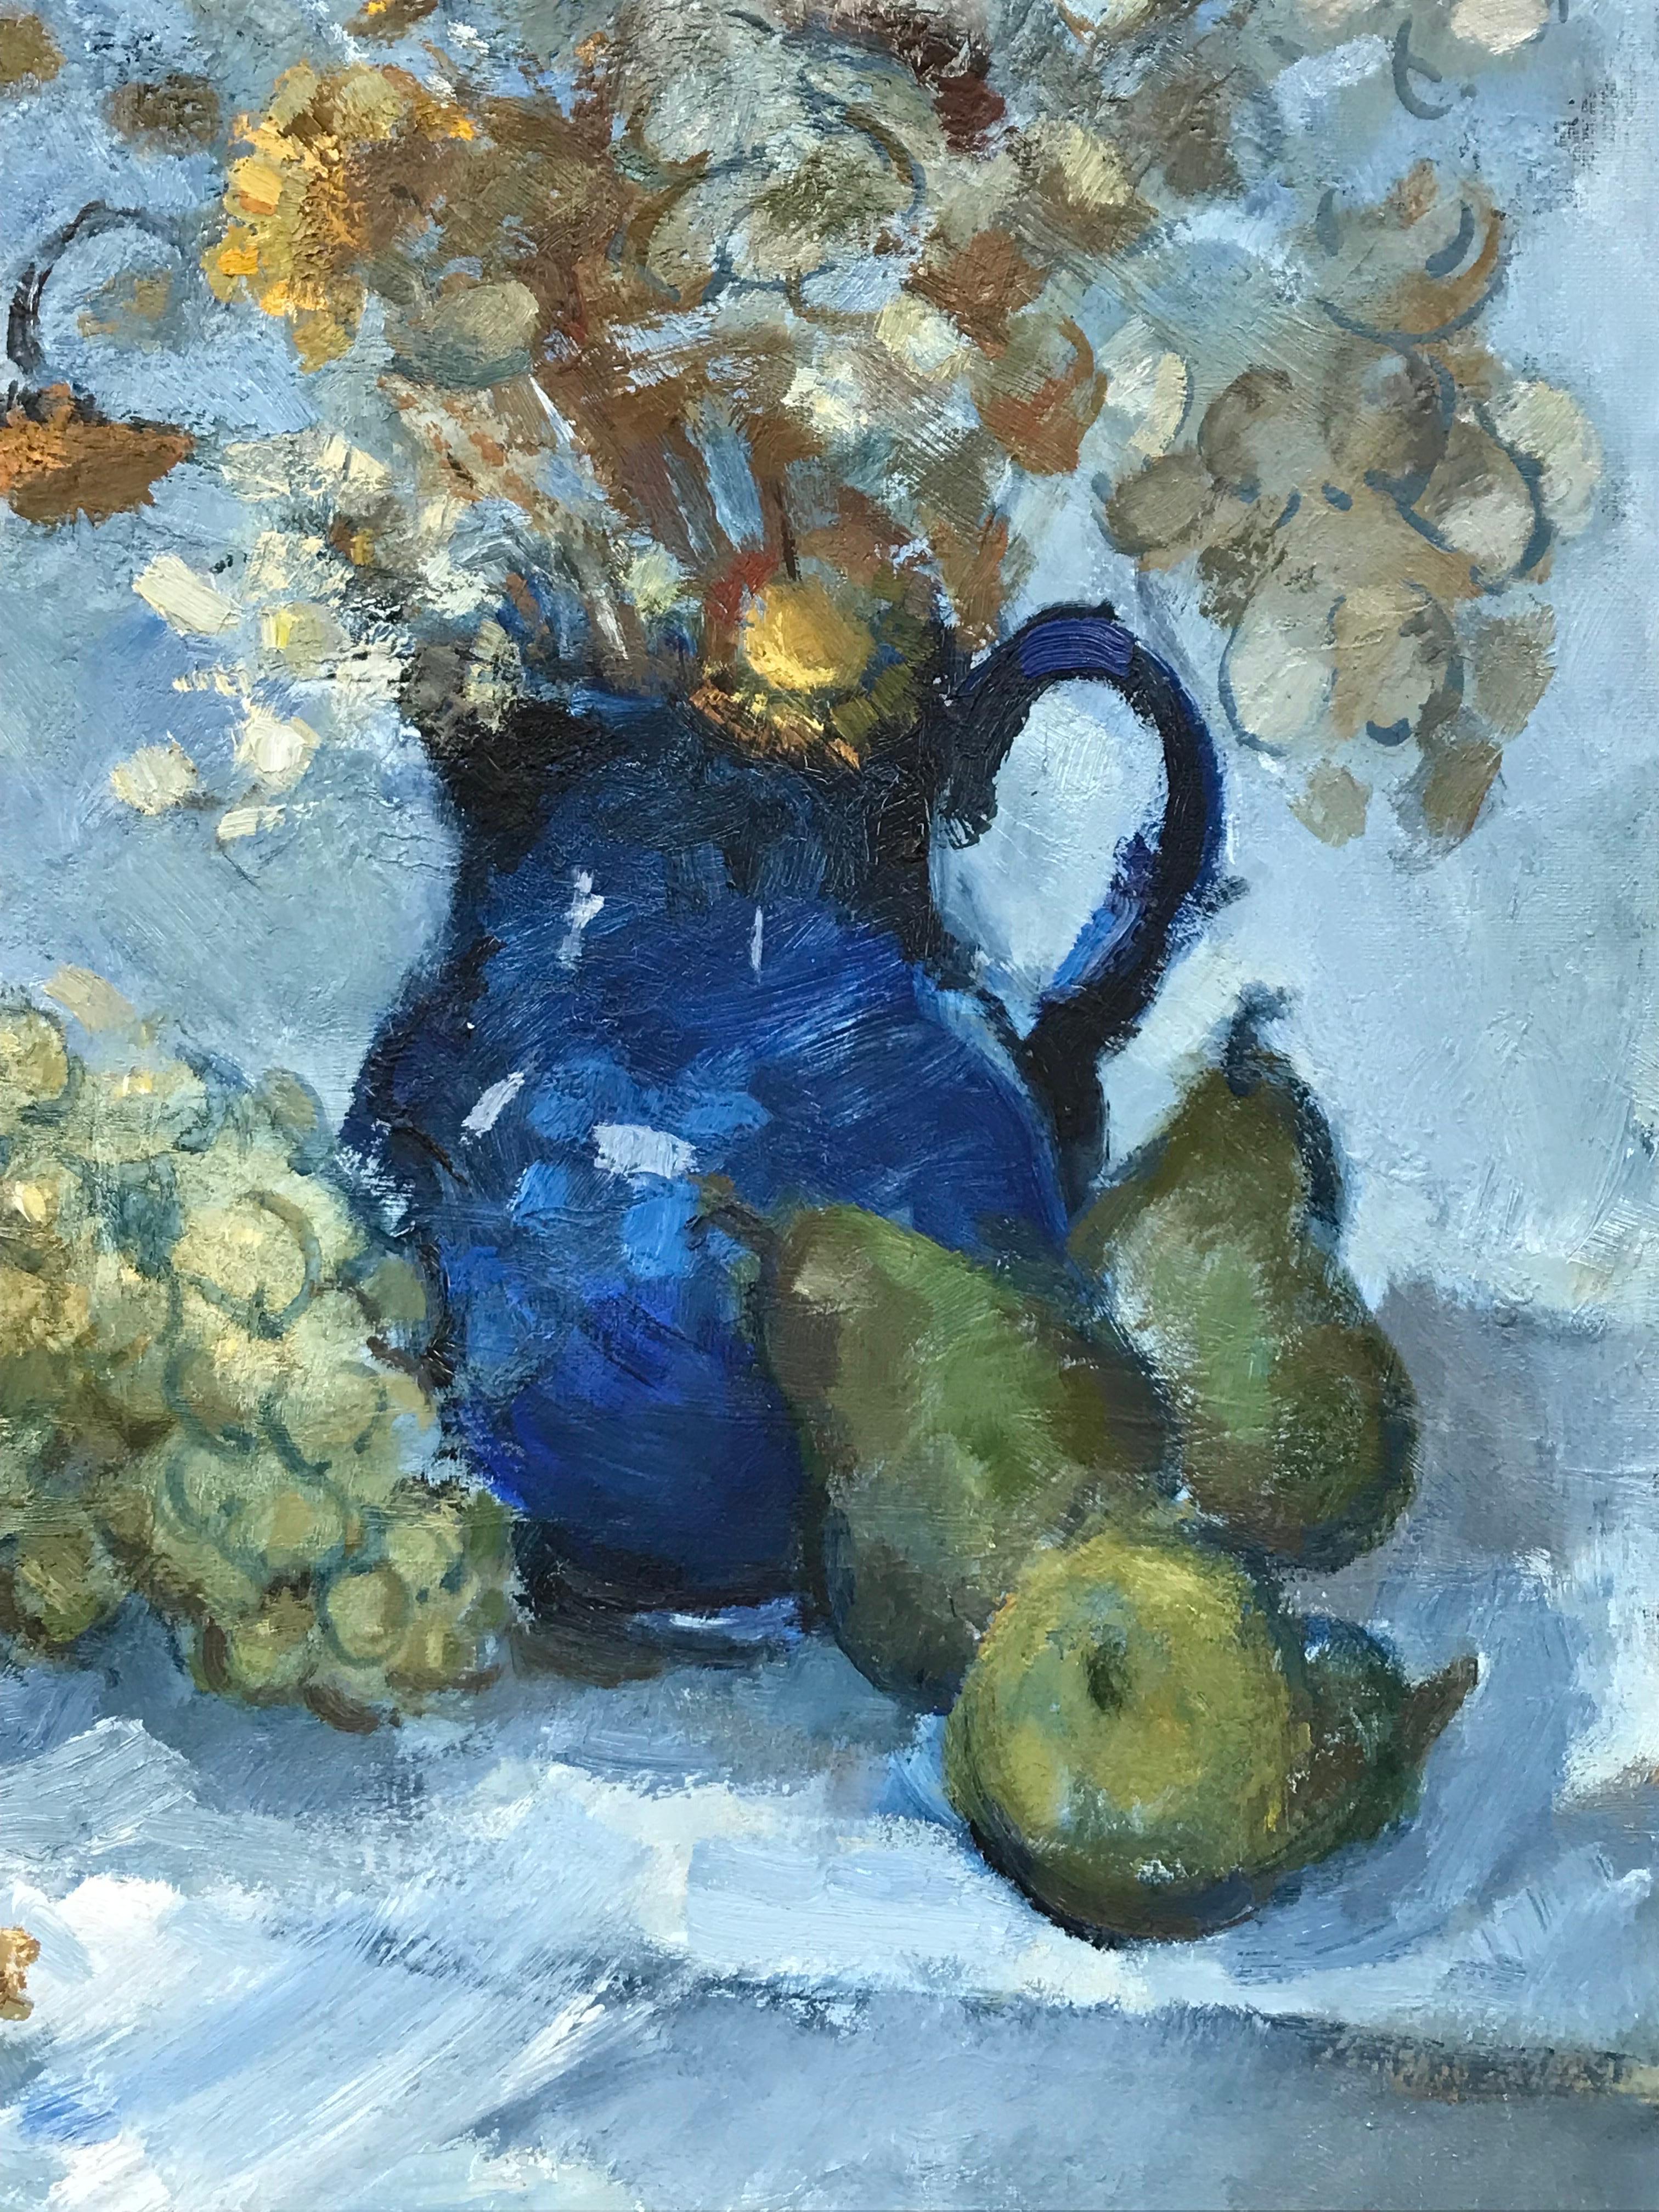 Artist/ School: French School, 20th century, indistinctly signed

Title: Interior Scene still life, flowers and fruit

Medium: oil painting on canvas, unframed

Size:

canvas:   24 x 19.5 inches

Provenance: private collection, France

Condition: